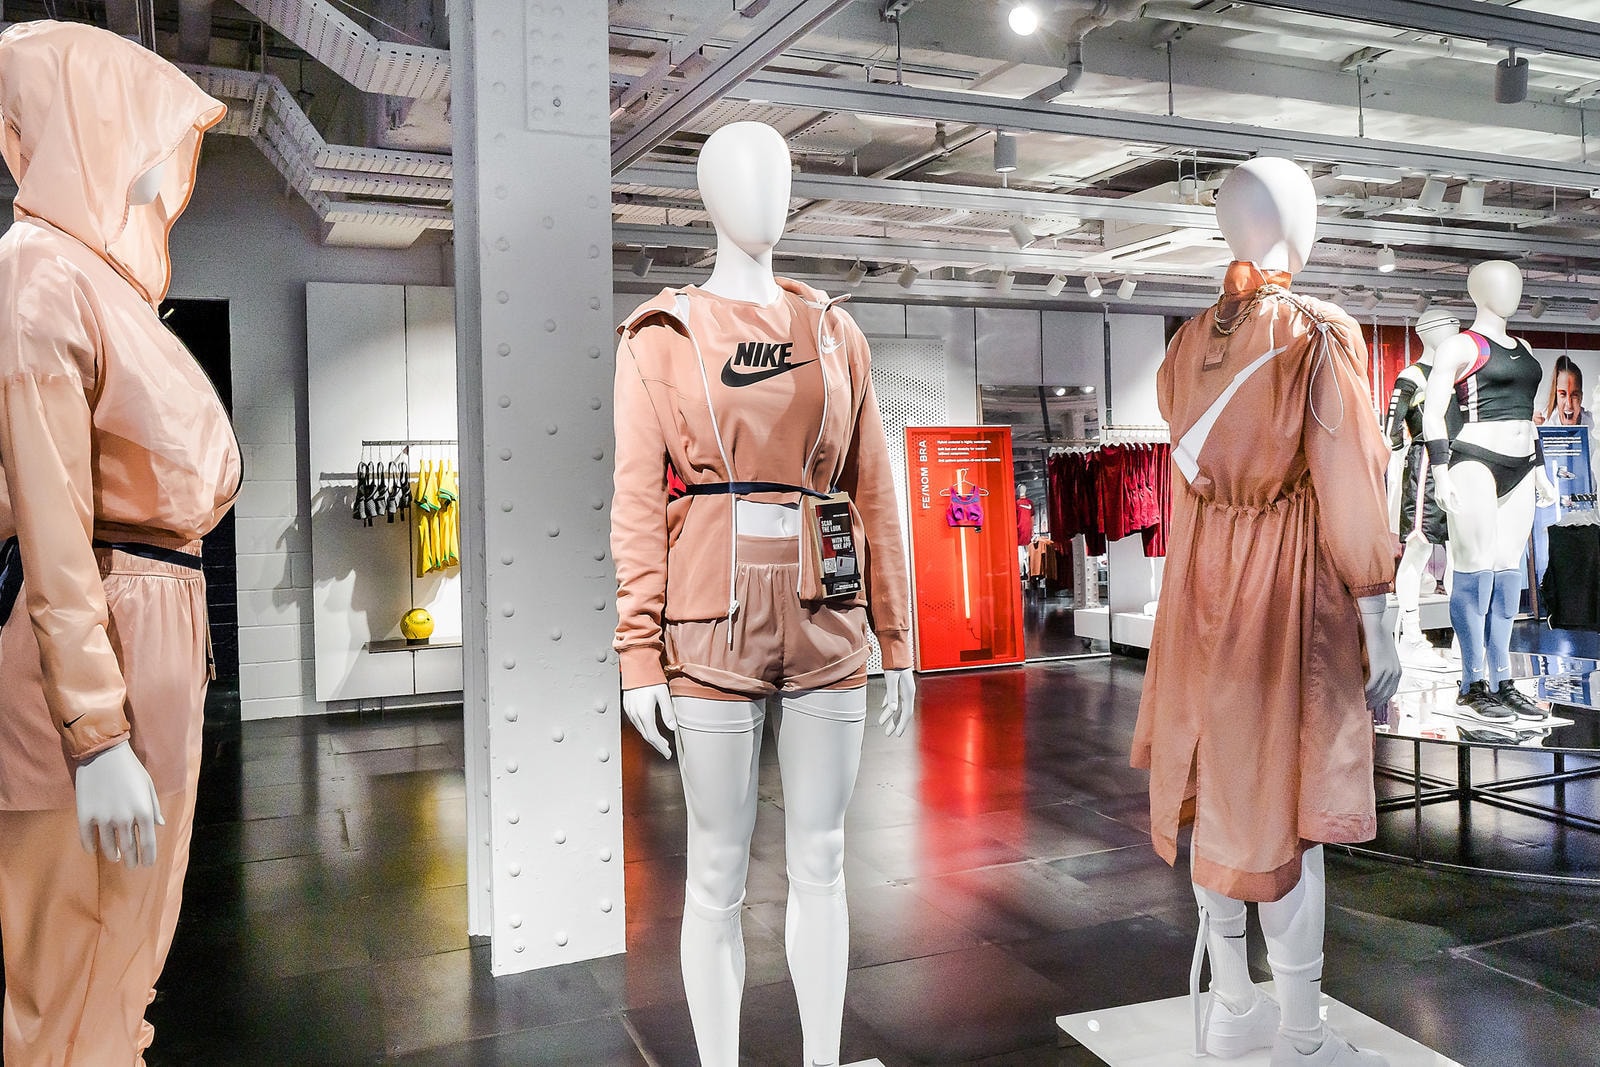 NikeTown London Opens New Inclusive Women's Space Sportswear Fashion Size Inclusive Mannequin Disabled Athlete Running Blade